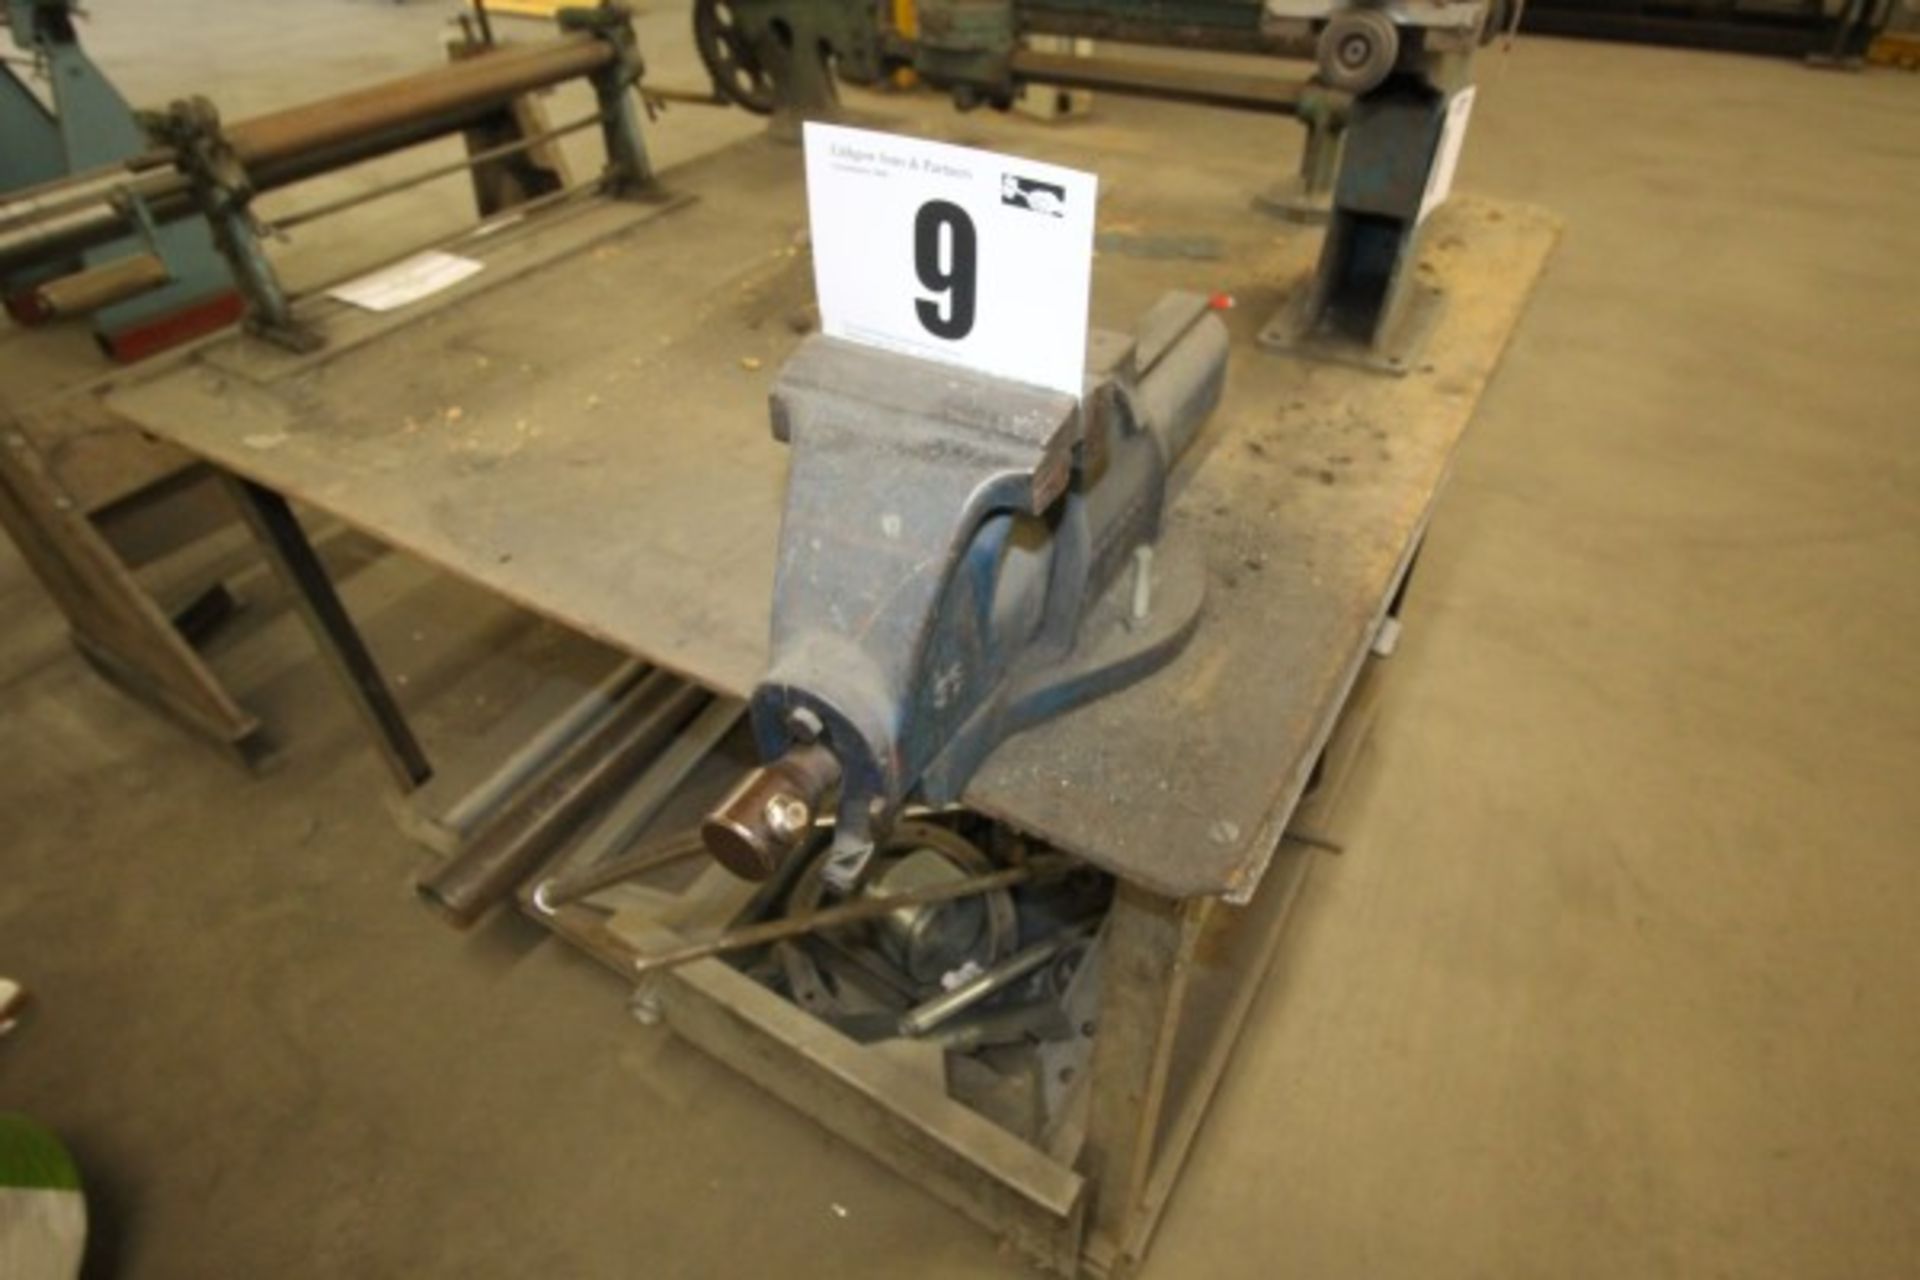 RECORD 6INCH QUICK RELEASE BENCH VICE COMPLETE WITH 50INCH x 48INCH WORK BENCH. LOAD-OUT CHARGE £